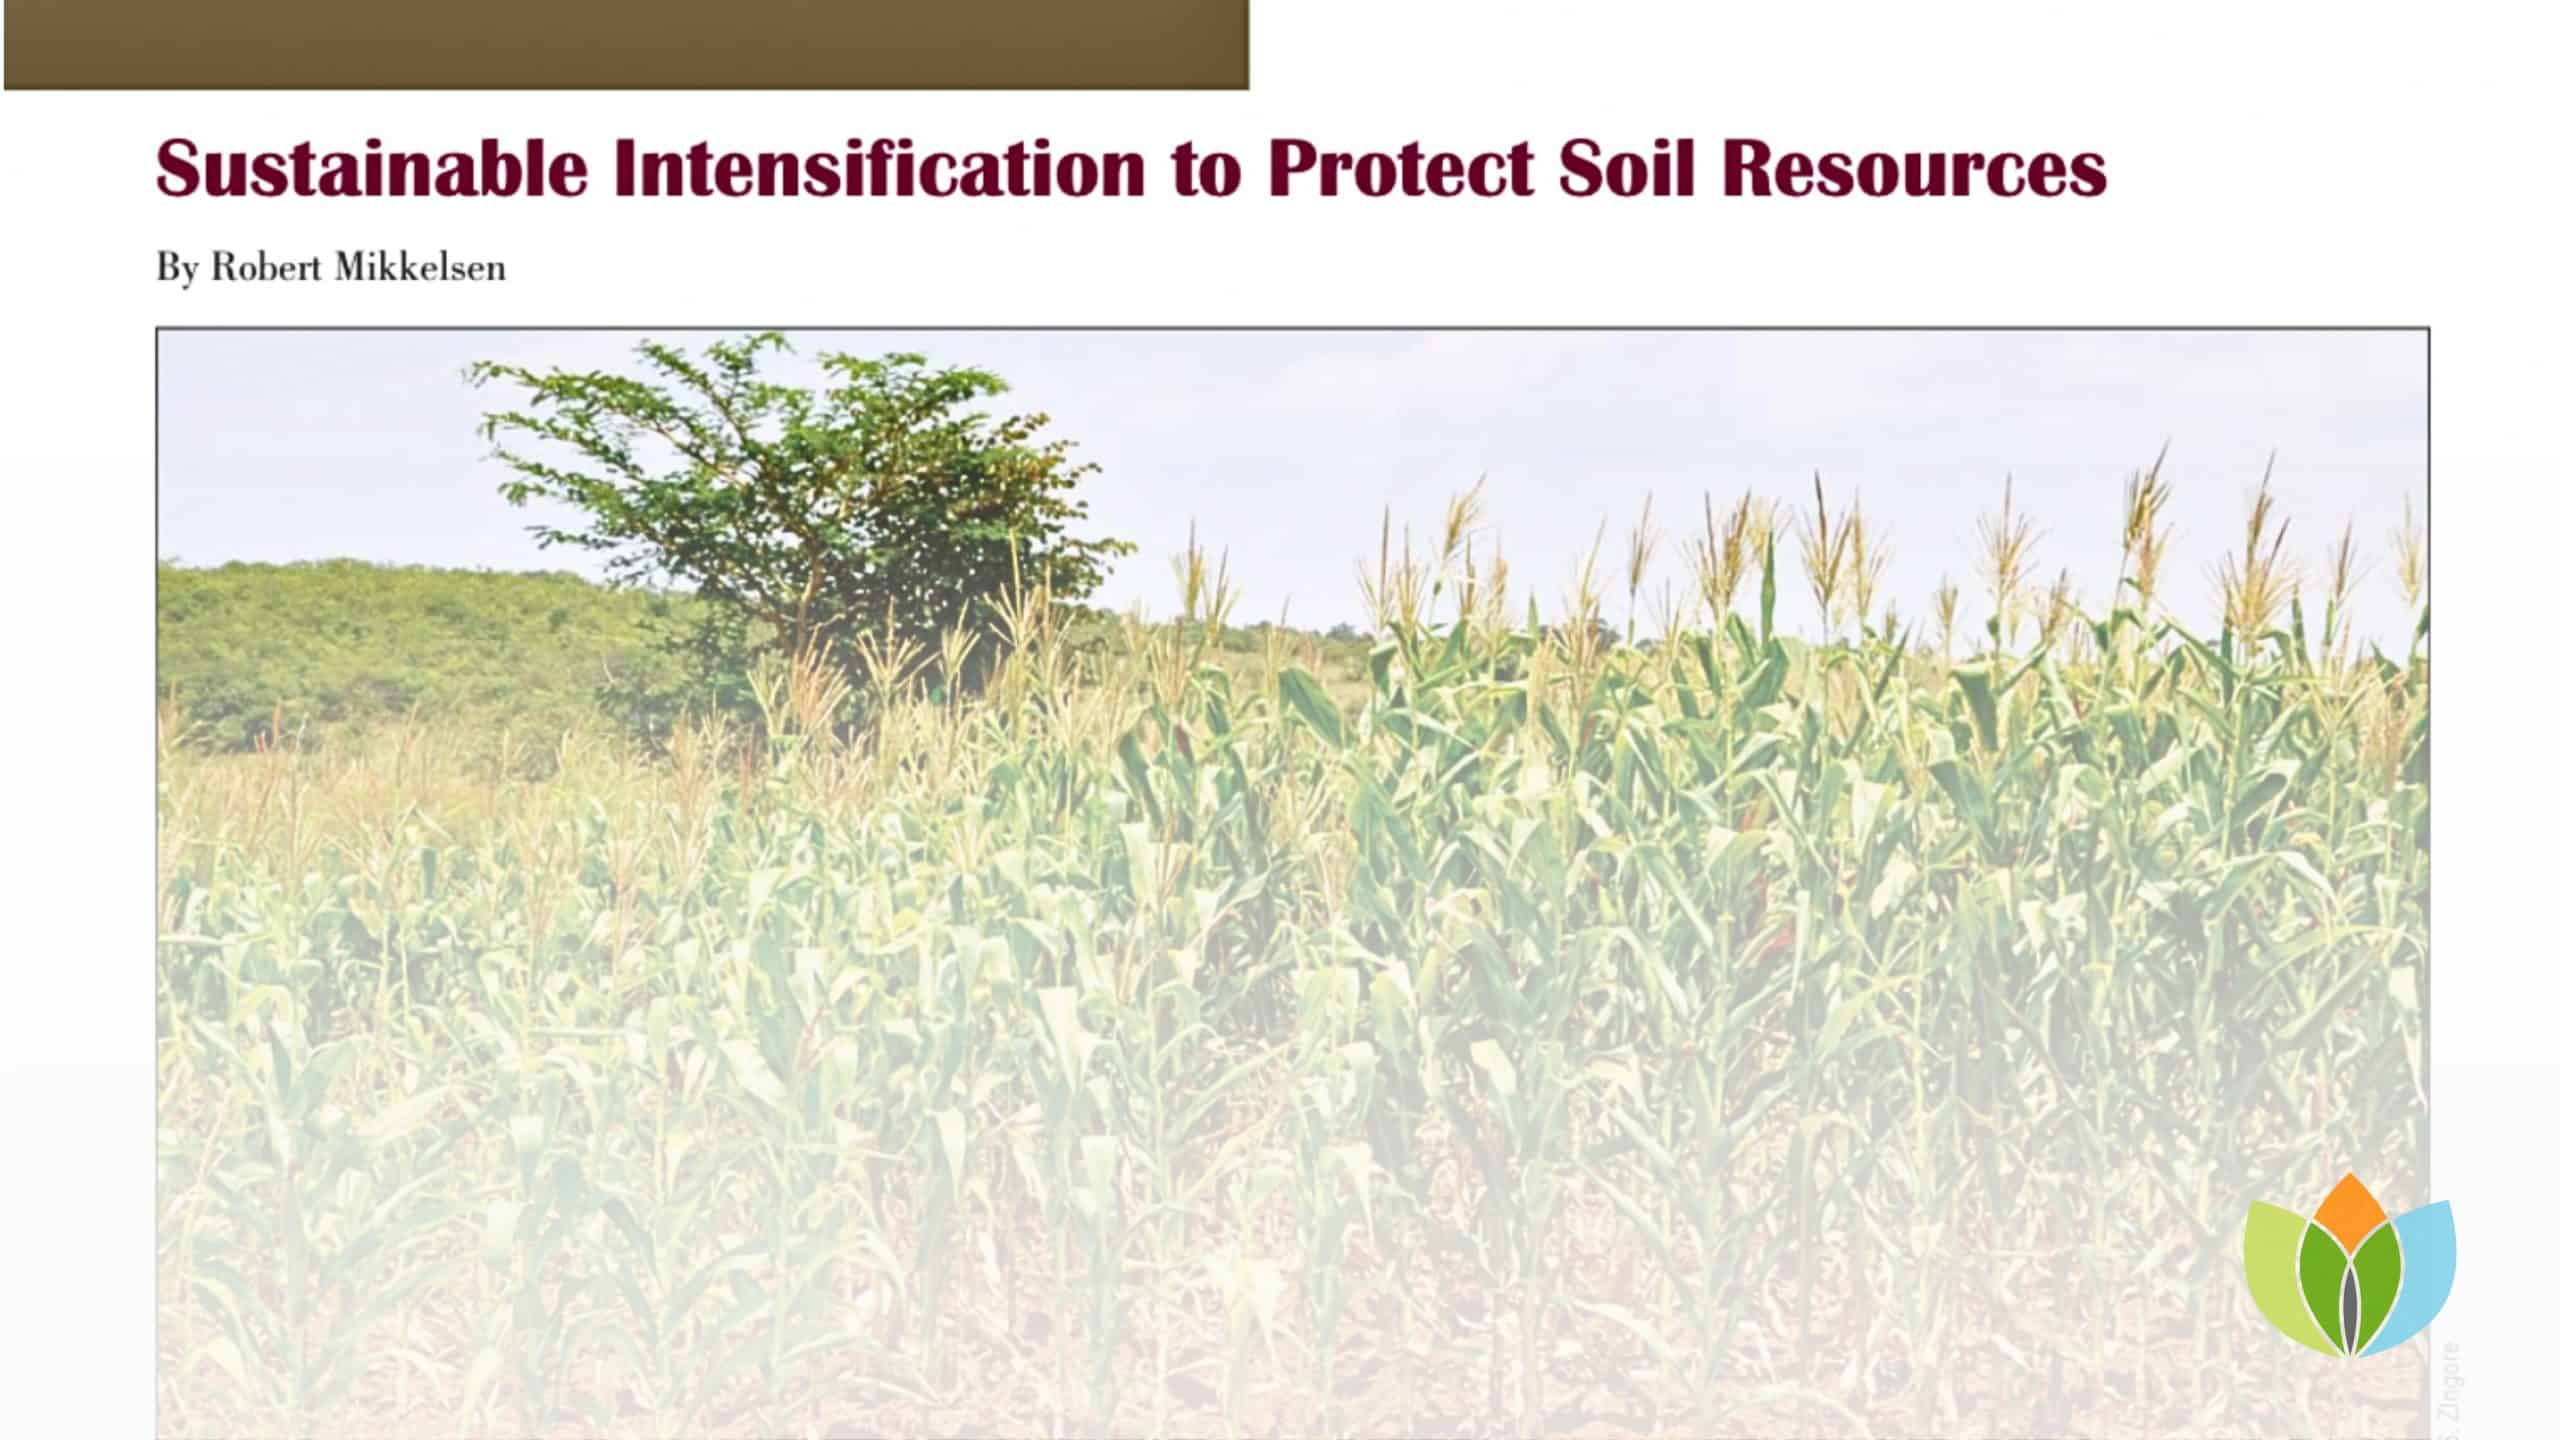 Sustainable Intensification to Protect Soil Resources